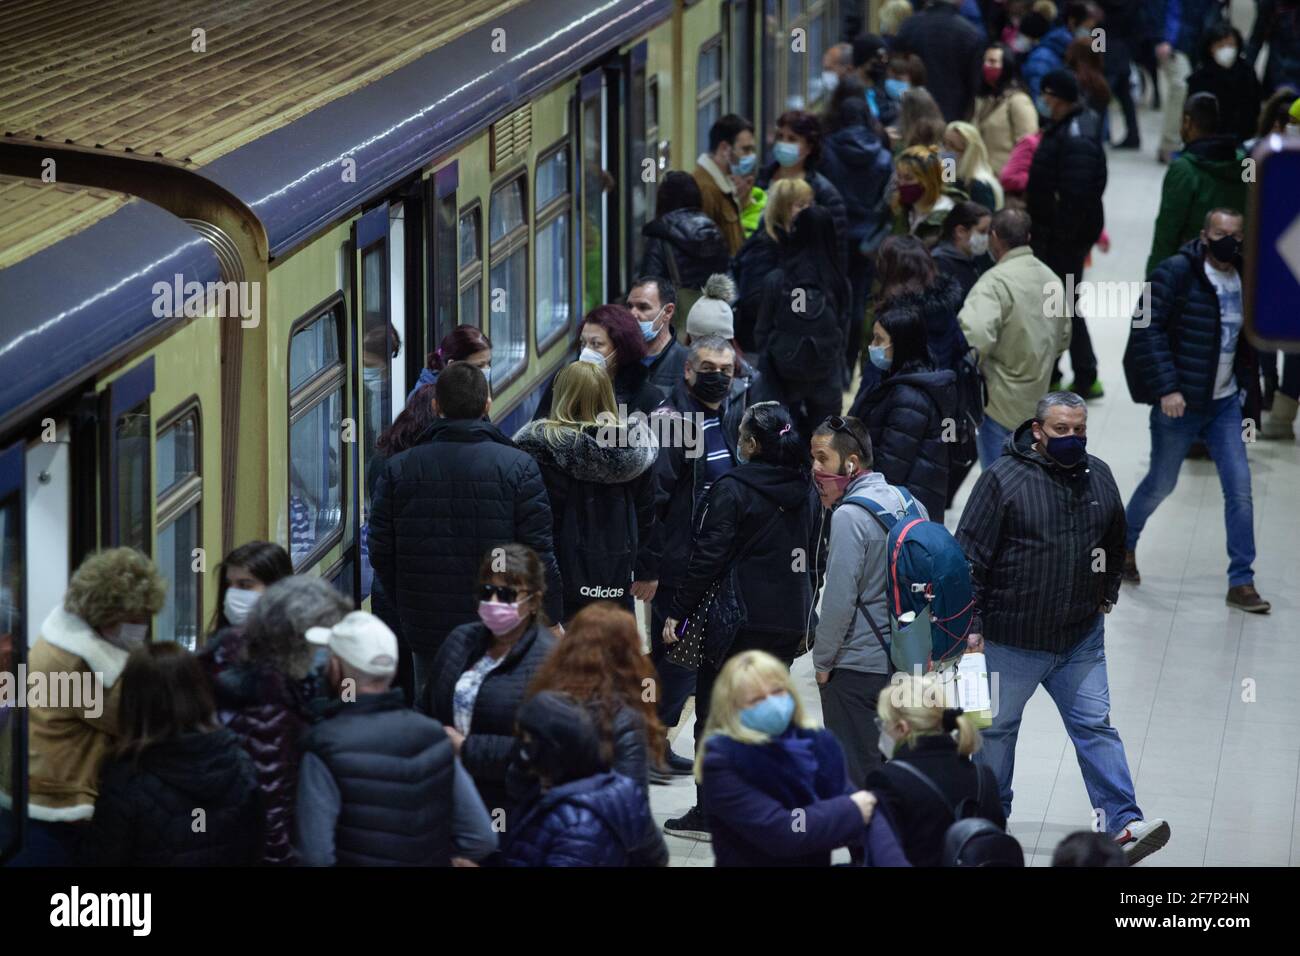 Page 2 - Sofia Subway High Resolution Stock Photography and Images - Alamy